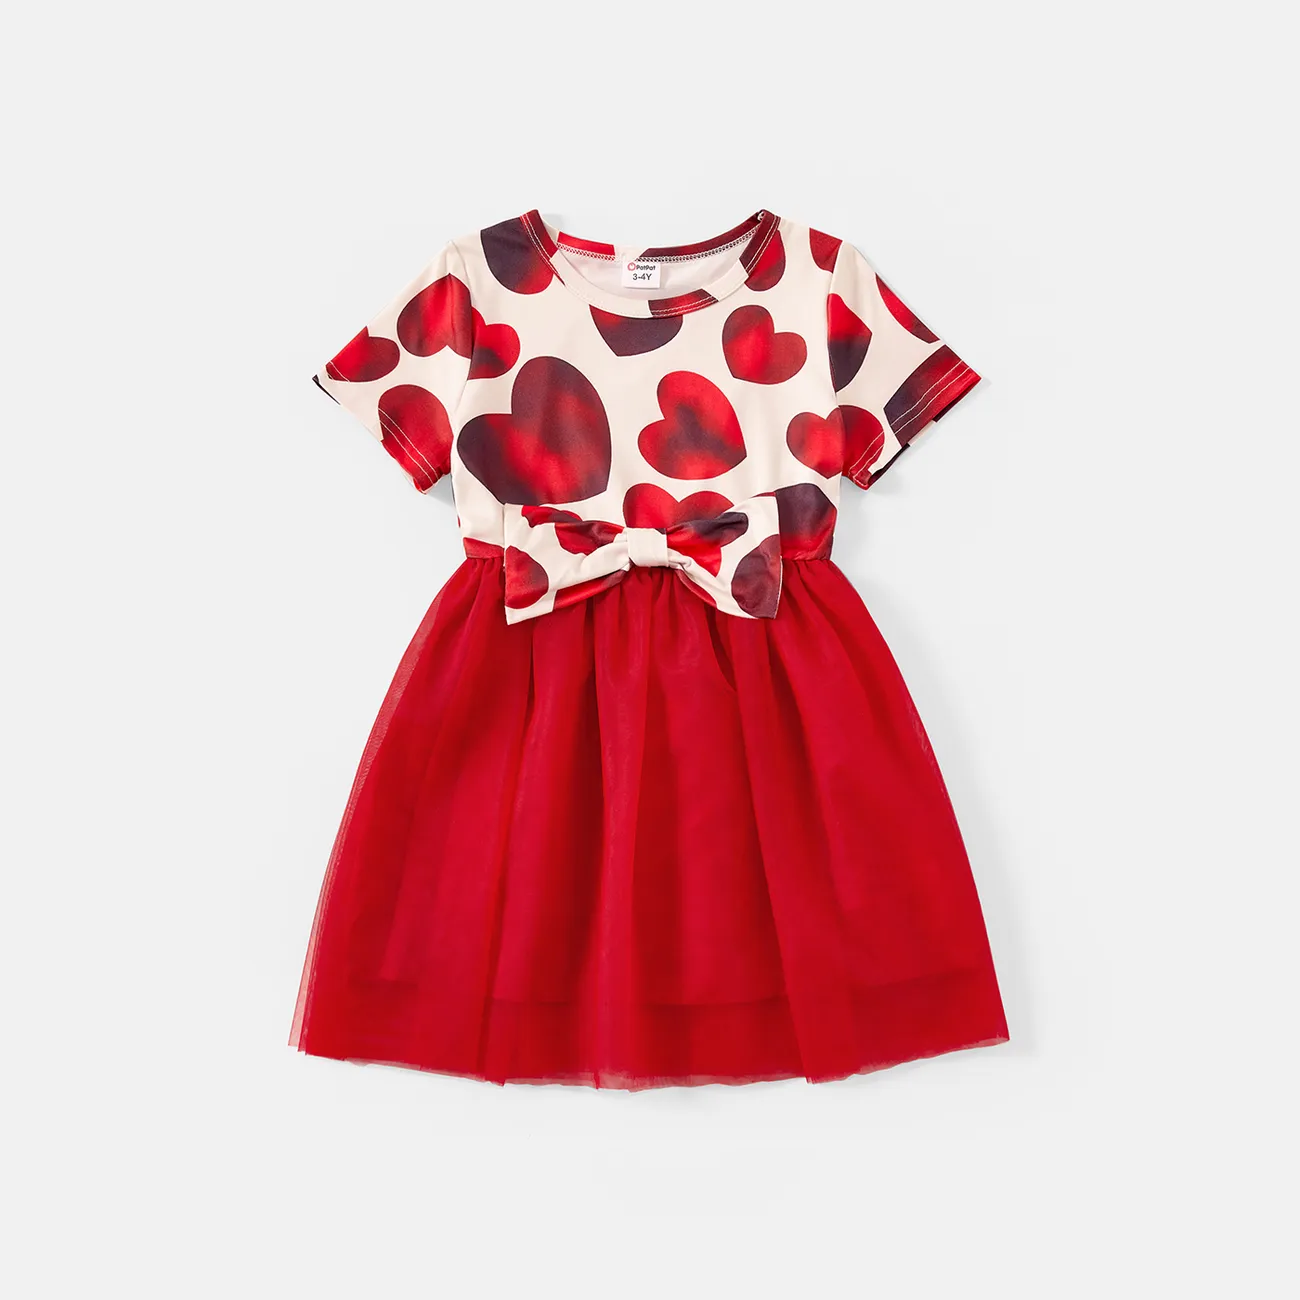 Family Matching Allover Red Heart Print Twist Knot Bodycon Dresses and Short-sleeve Colorblock T-shirts Sets Red/White big image 1